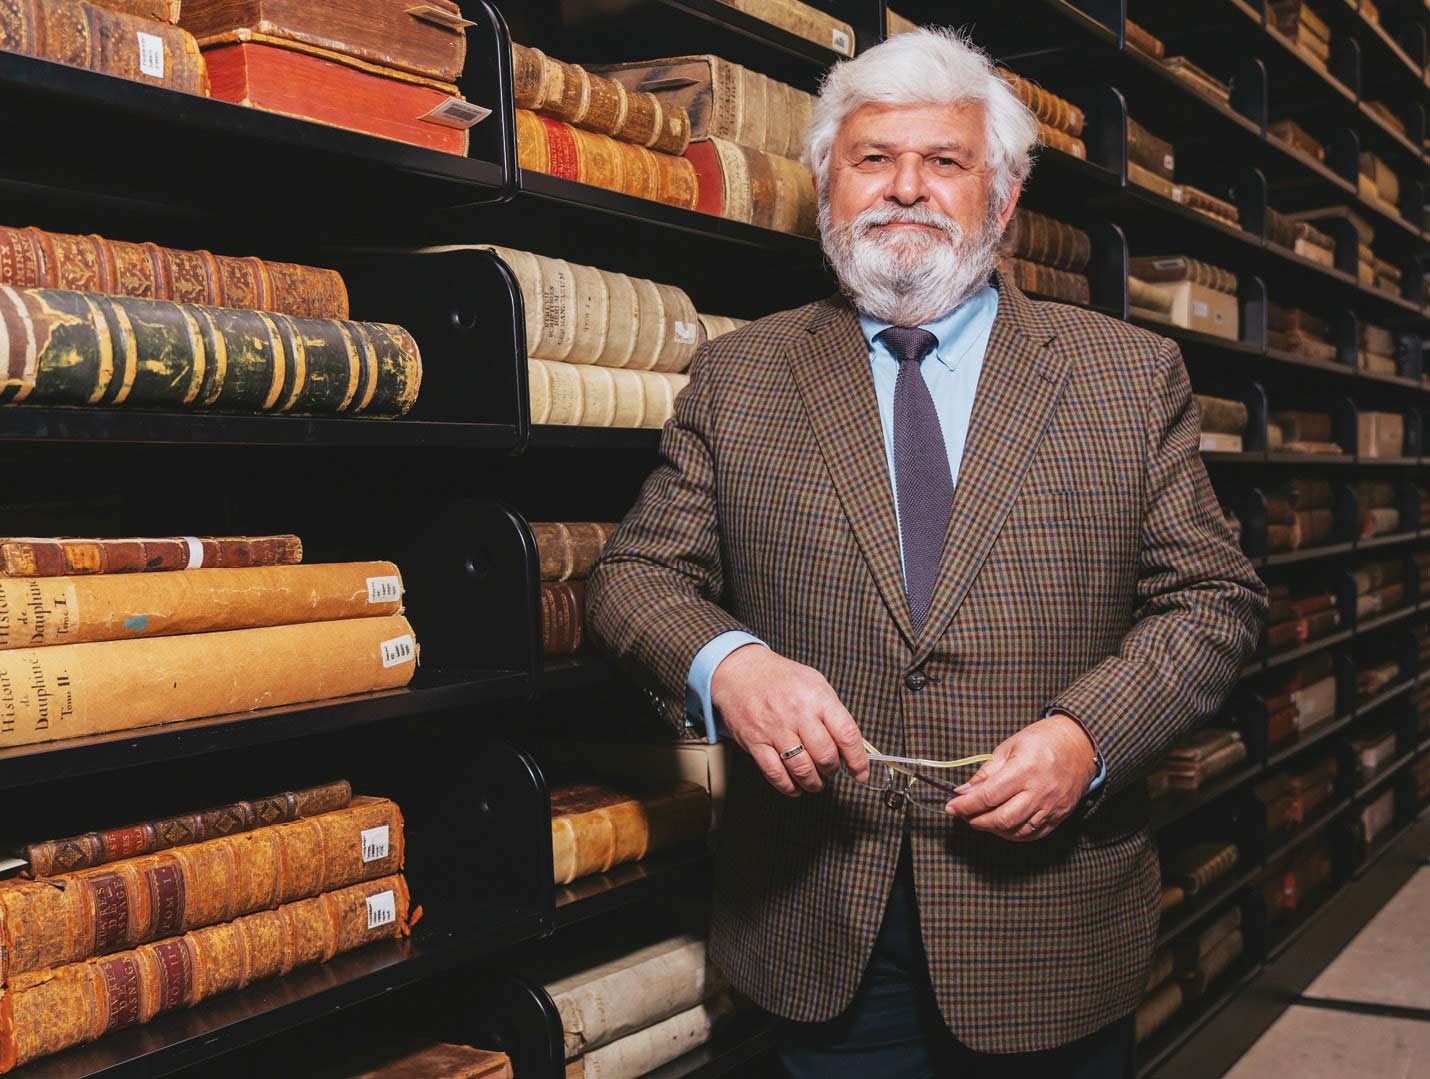 Laurent Mayali smiles in a green plaid suit inside a fancy library